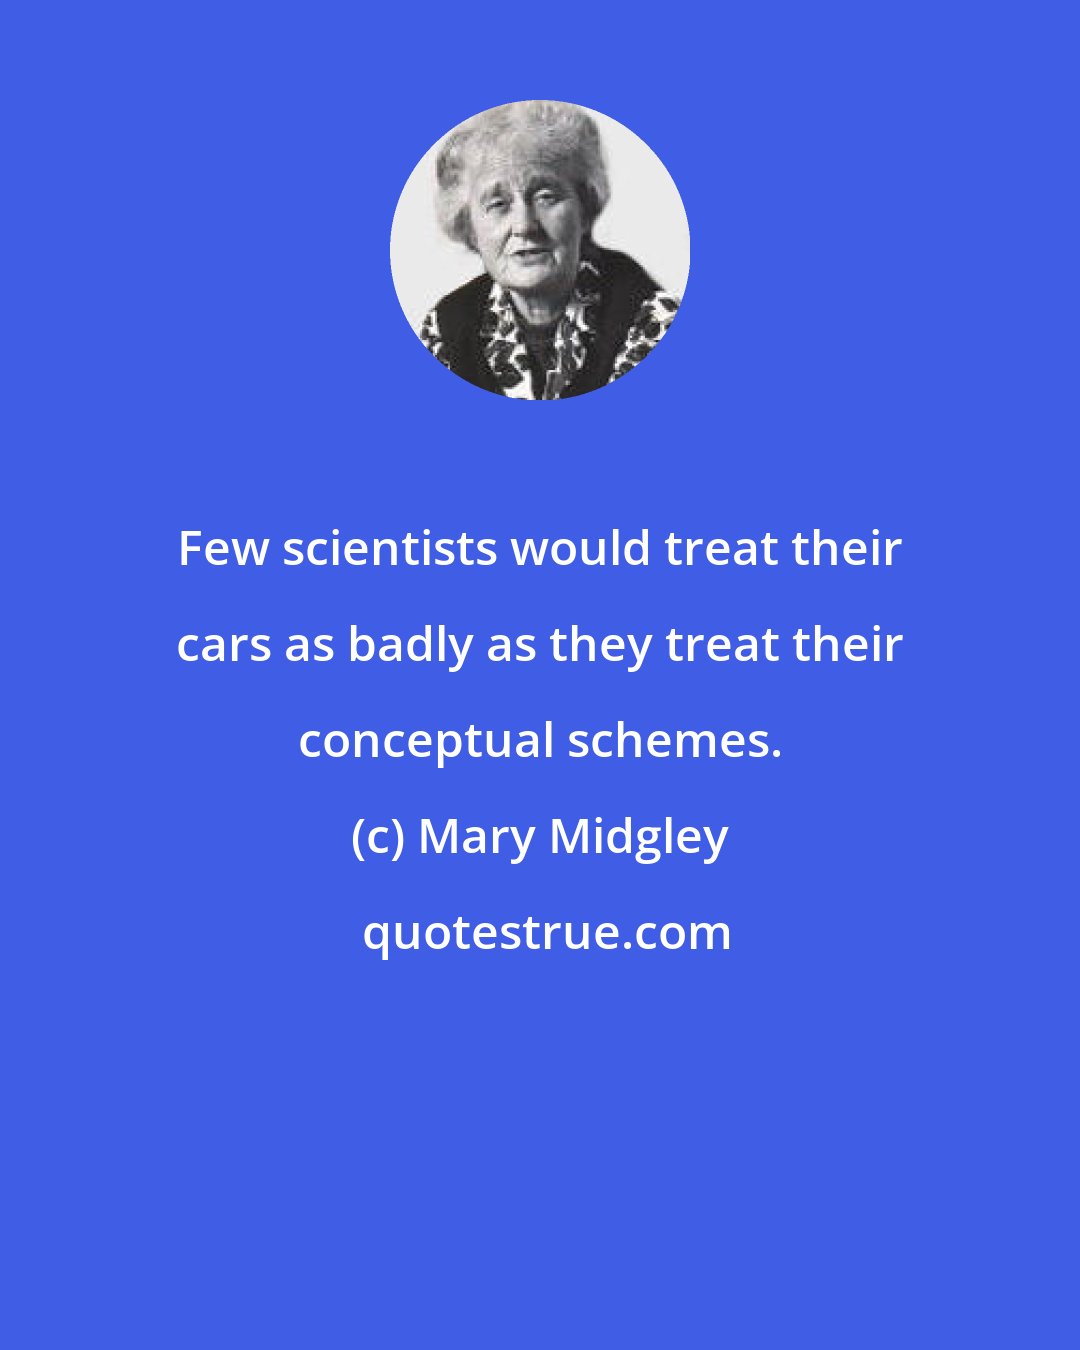 Mary Midgley: Few scientists would treat their cars as badly as they treat their conceptual schemes.